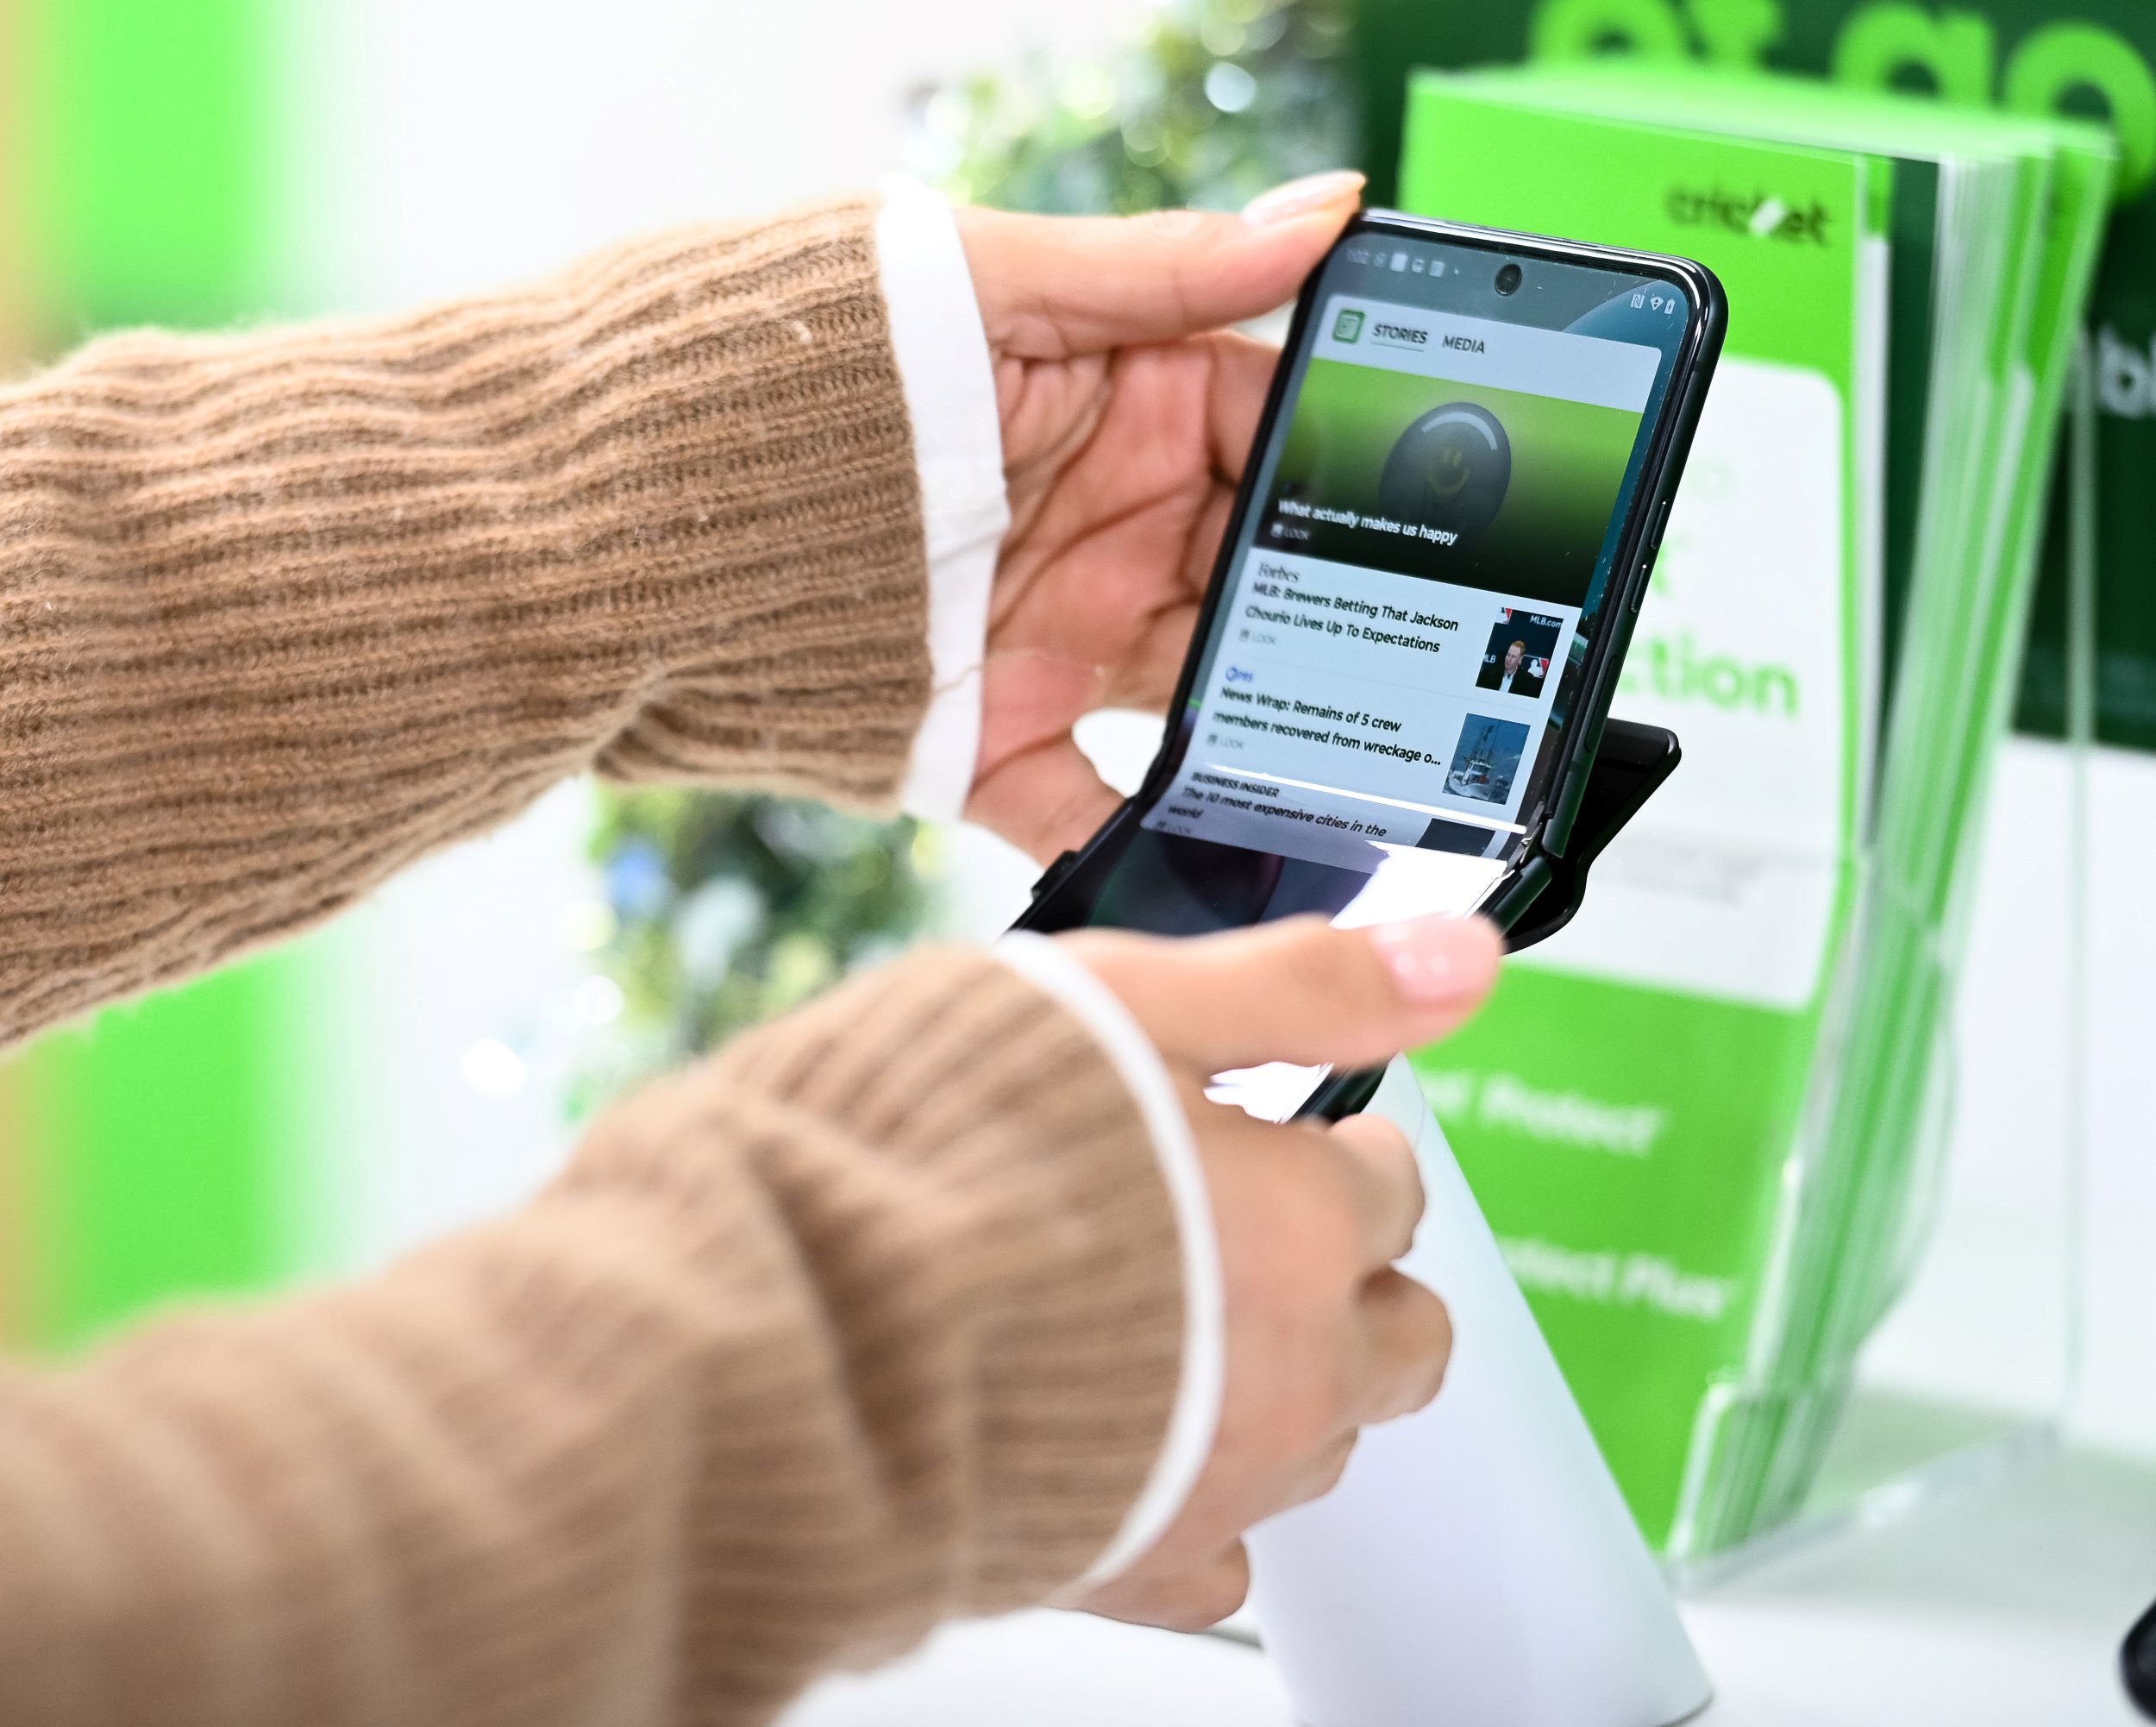 A person's hands holding a smartphone, displaying a webpage, over a green stand in a store with signage.